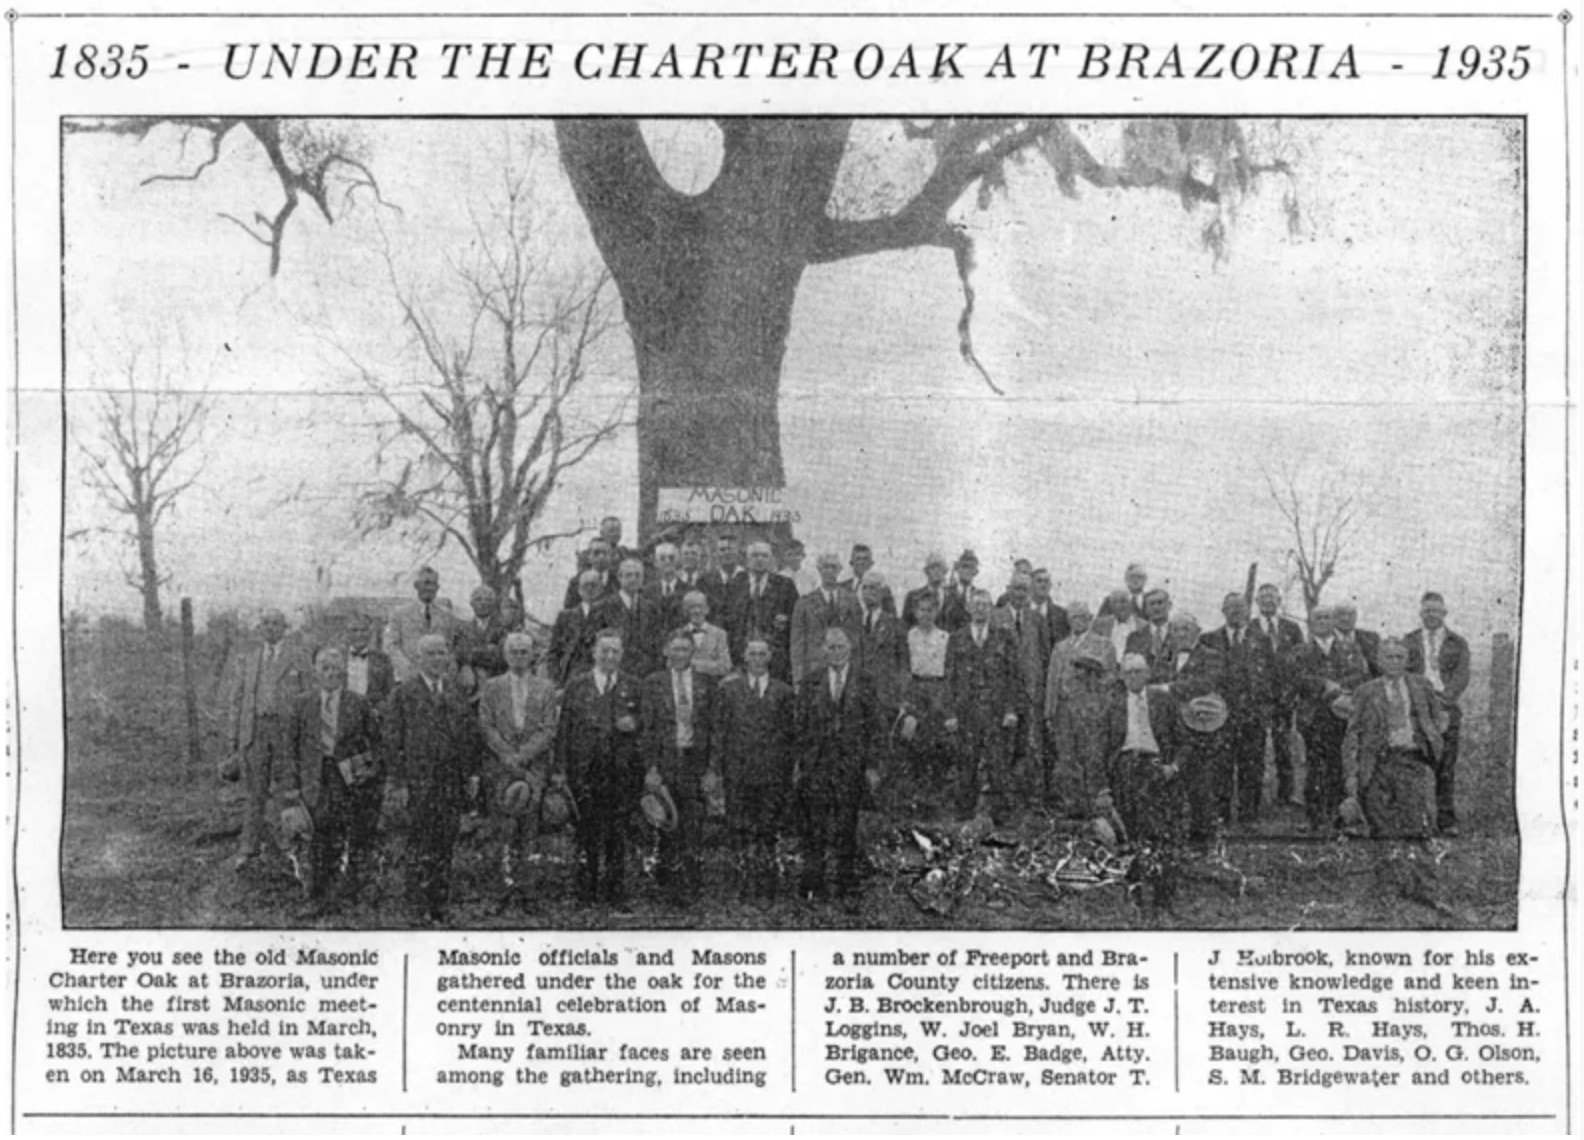 Meeting at the Charter Oak at Brazoria, 1935